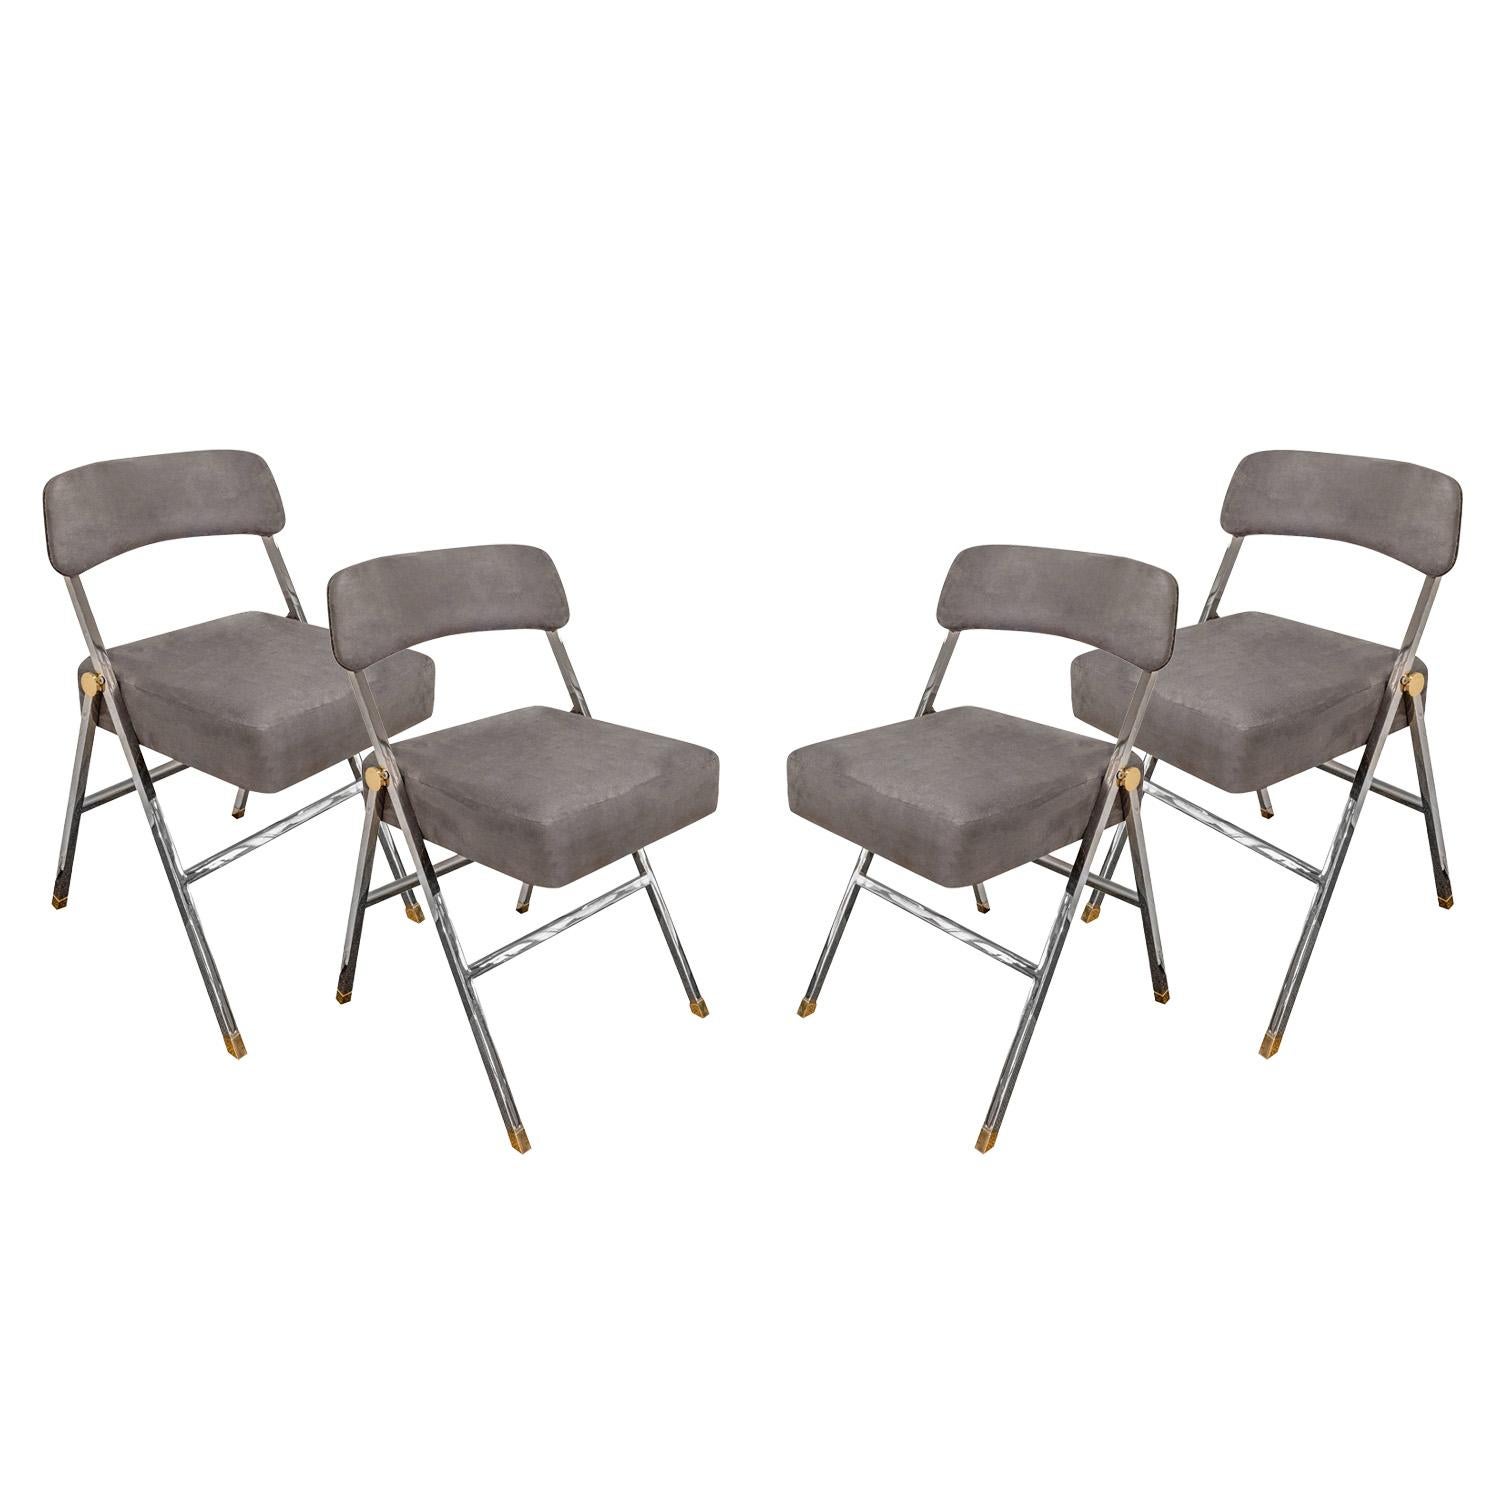 Rare set of 4 folding chairs, beautifully crafted in polished brass and chrome with upholstered seats and backs, by Karl Springer, American 1980's.  Metal has been professionally cleaned and polished, chairs have been newly reupholstered in gray